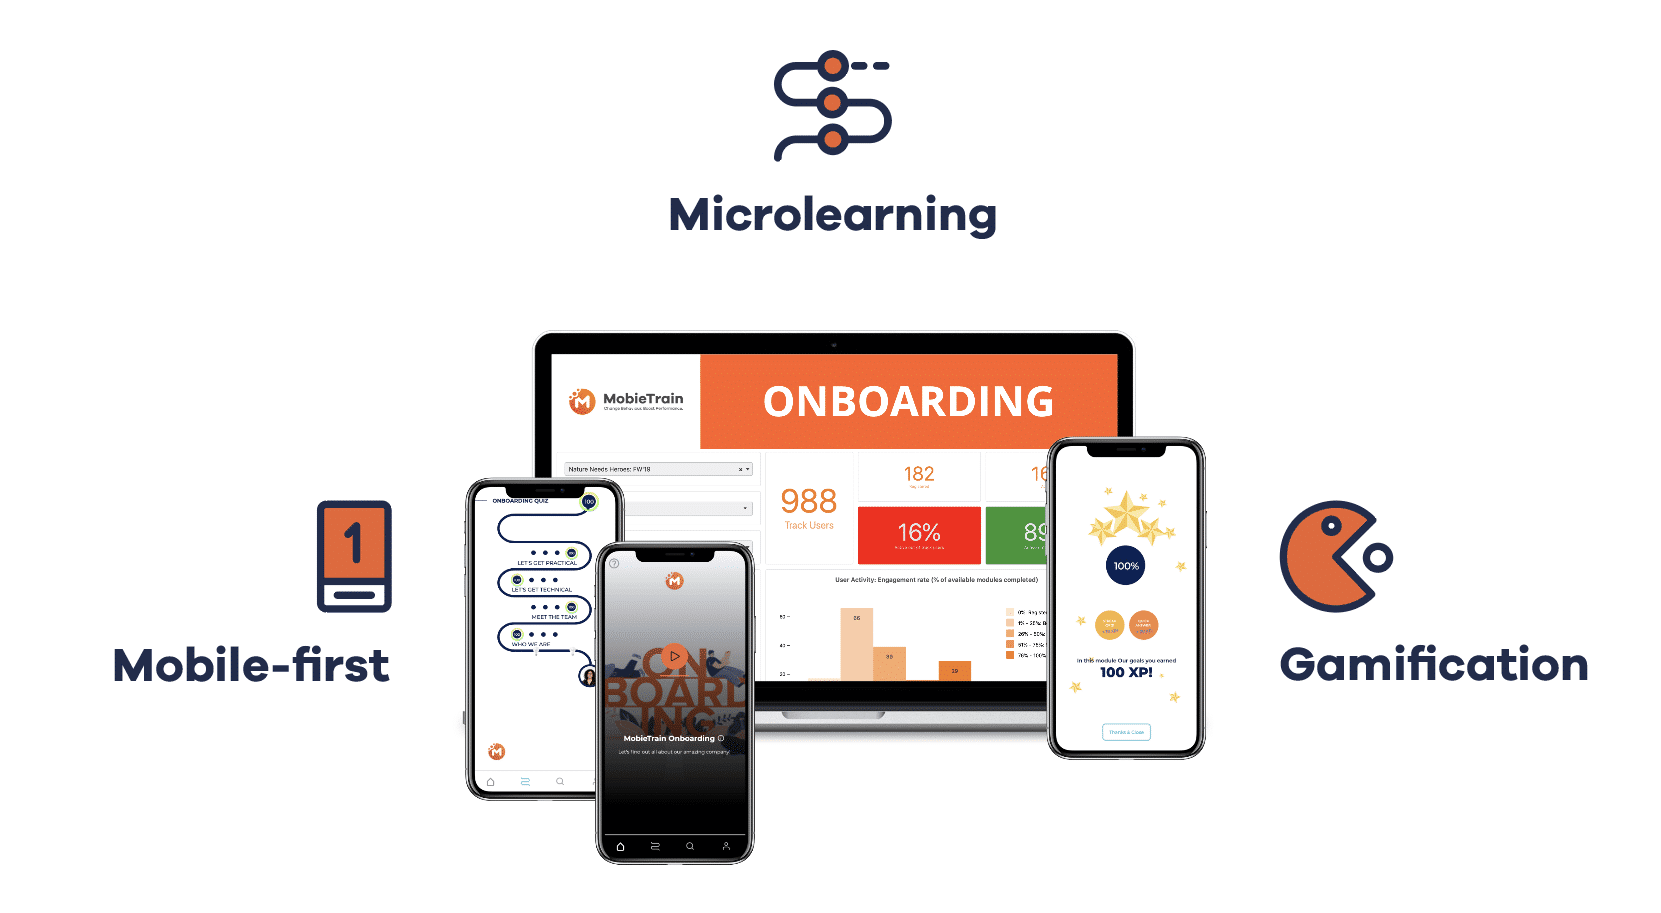 Microlearning solution platform